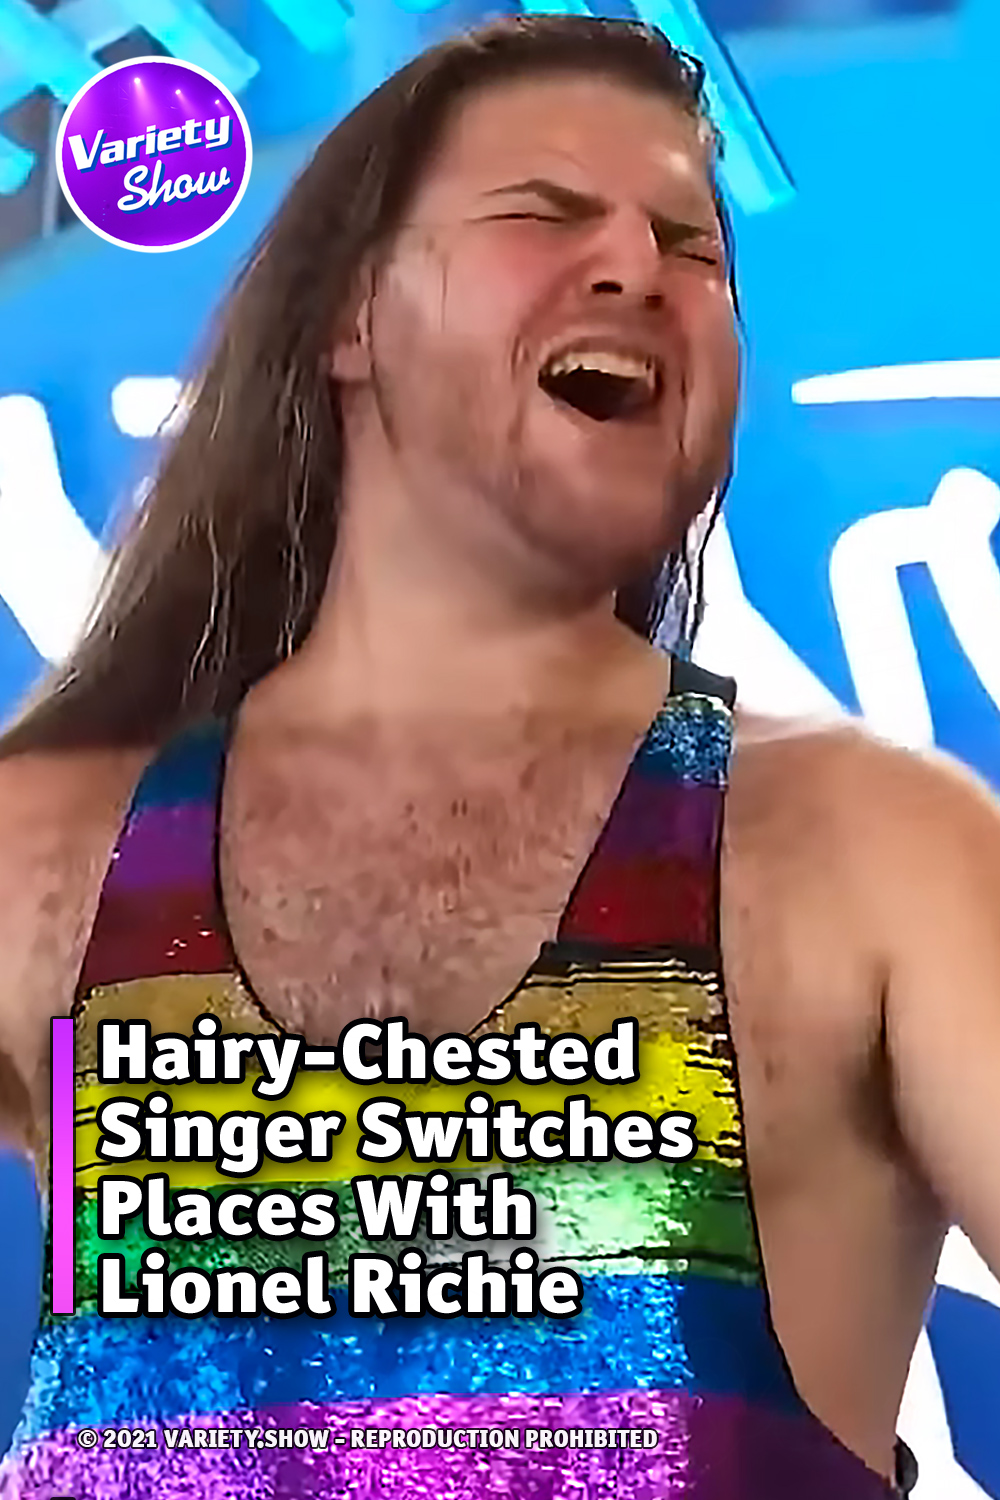 Hairy-Chested Singer Switches Places With Lionel Richie